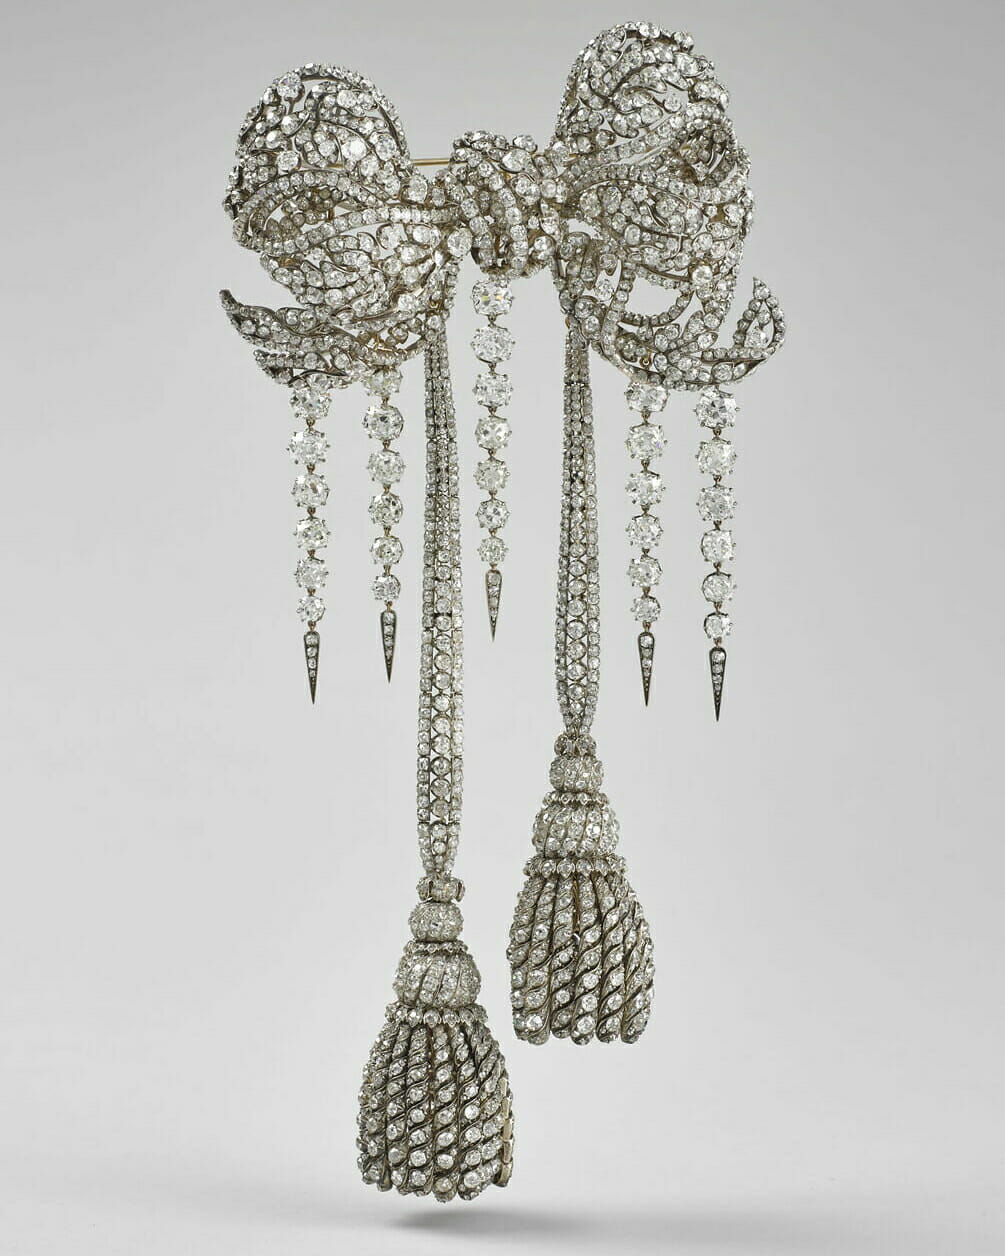 Marie-Antoinette's Jewels Come to Auction, Jewelry